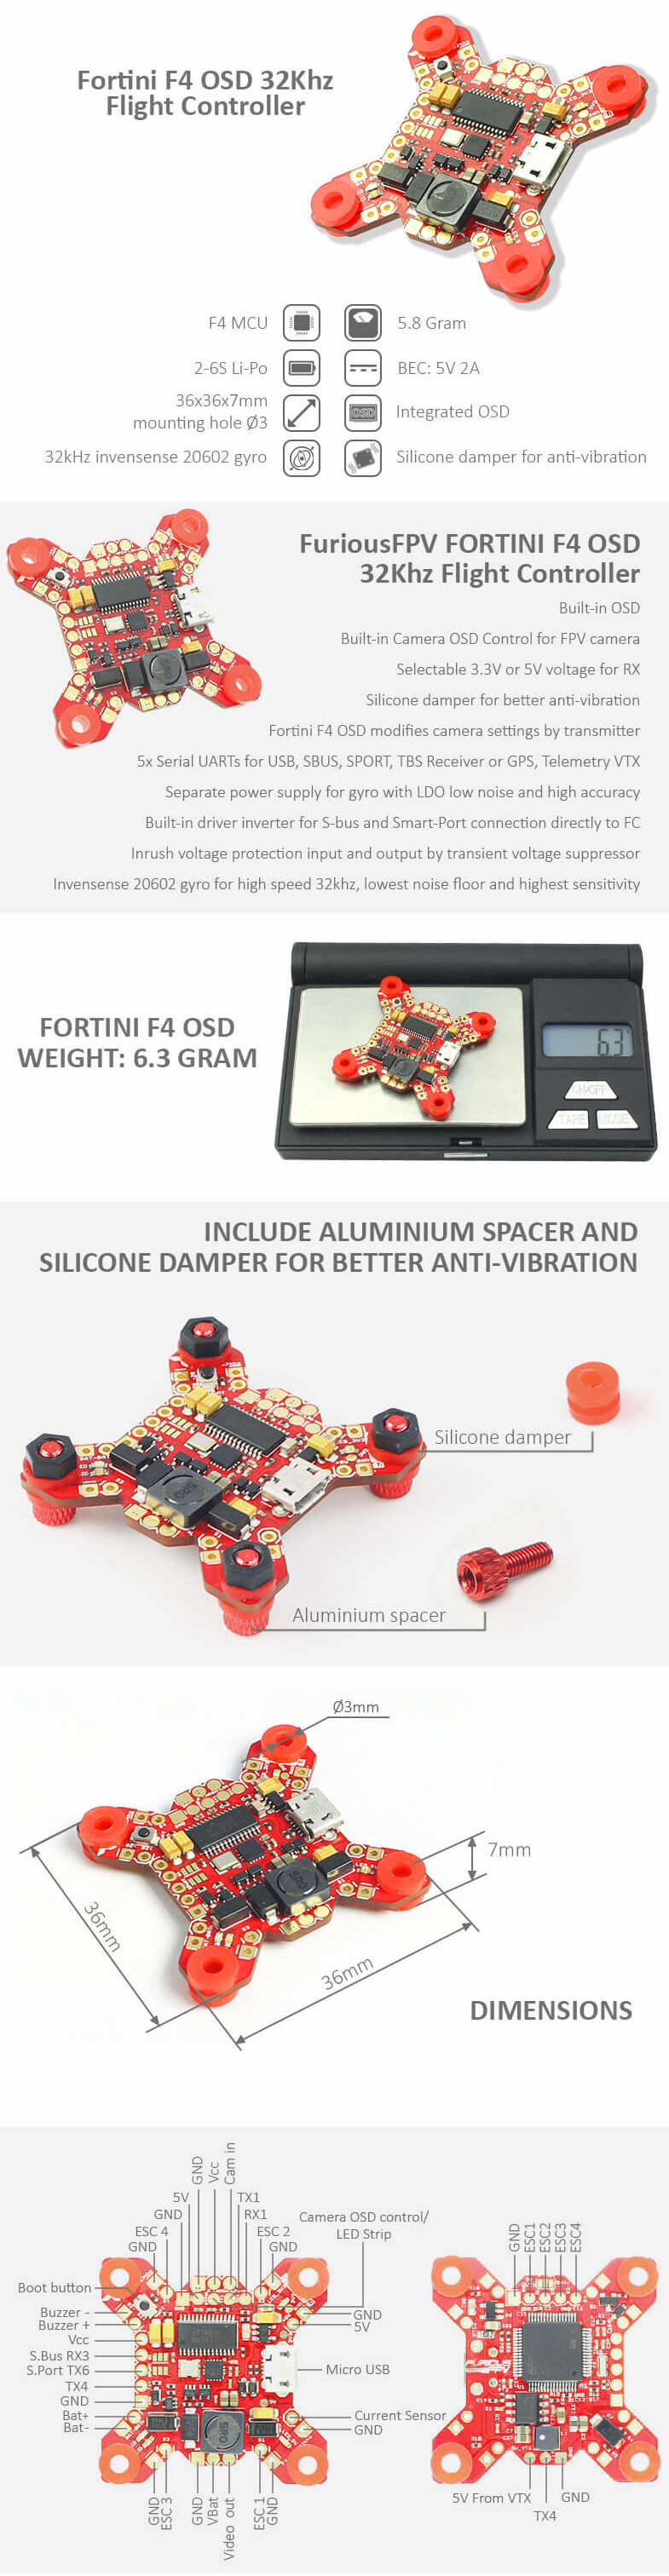 Fortini OSD Instructions and Wiring Diagram